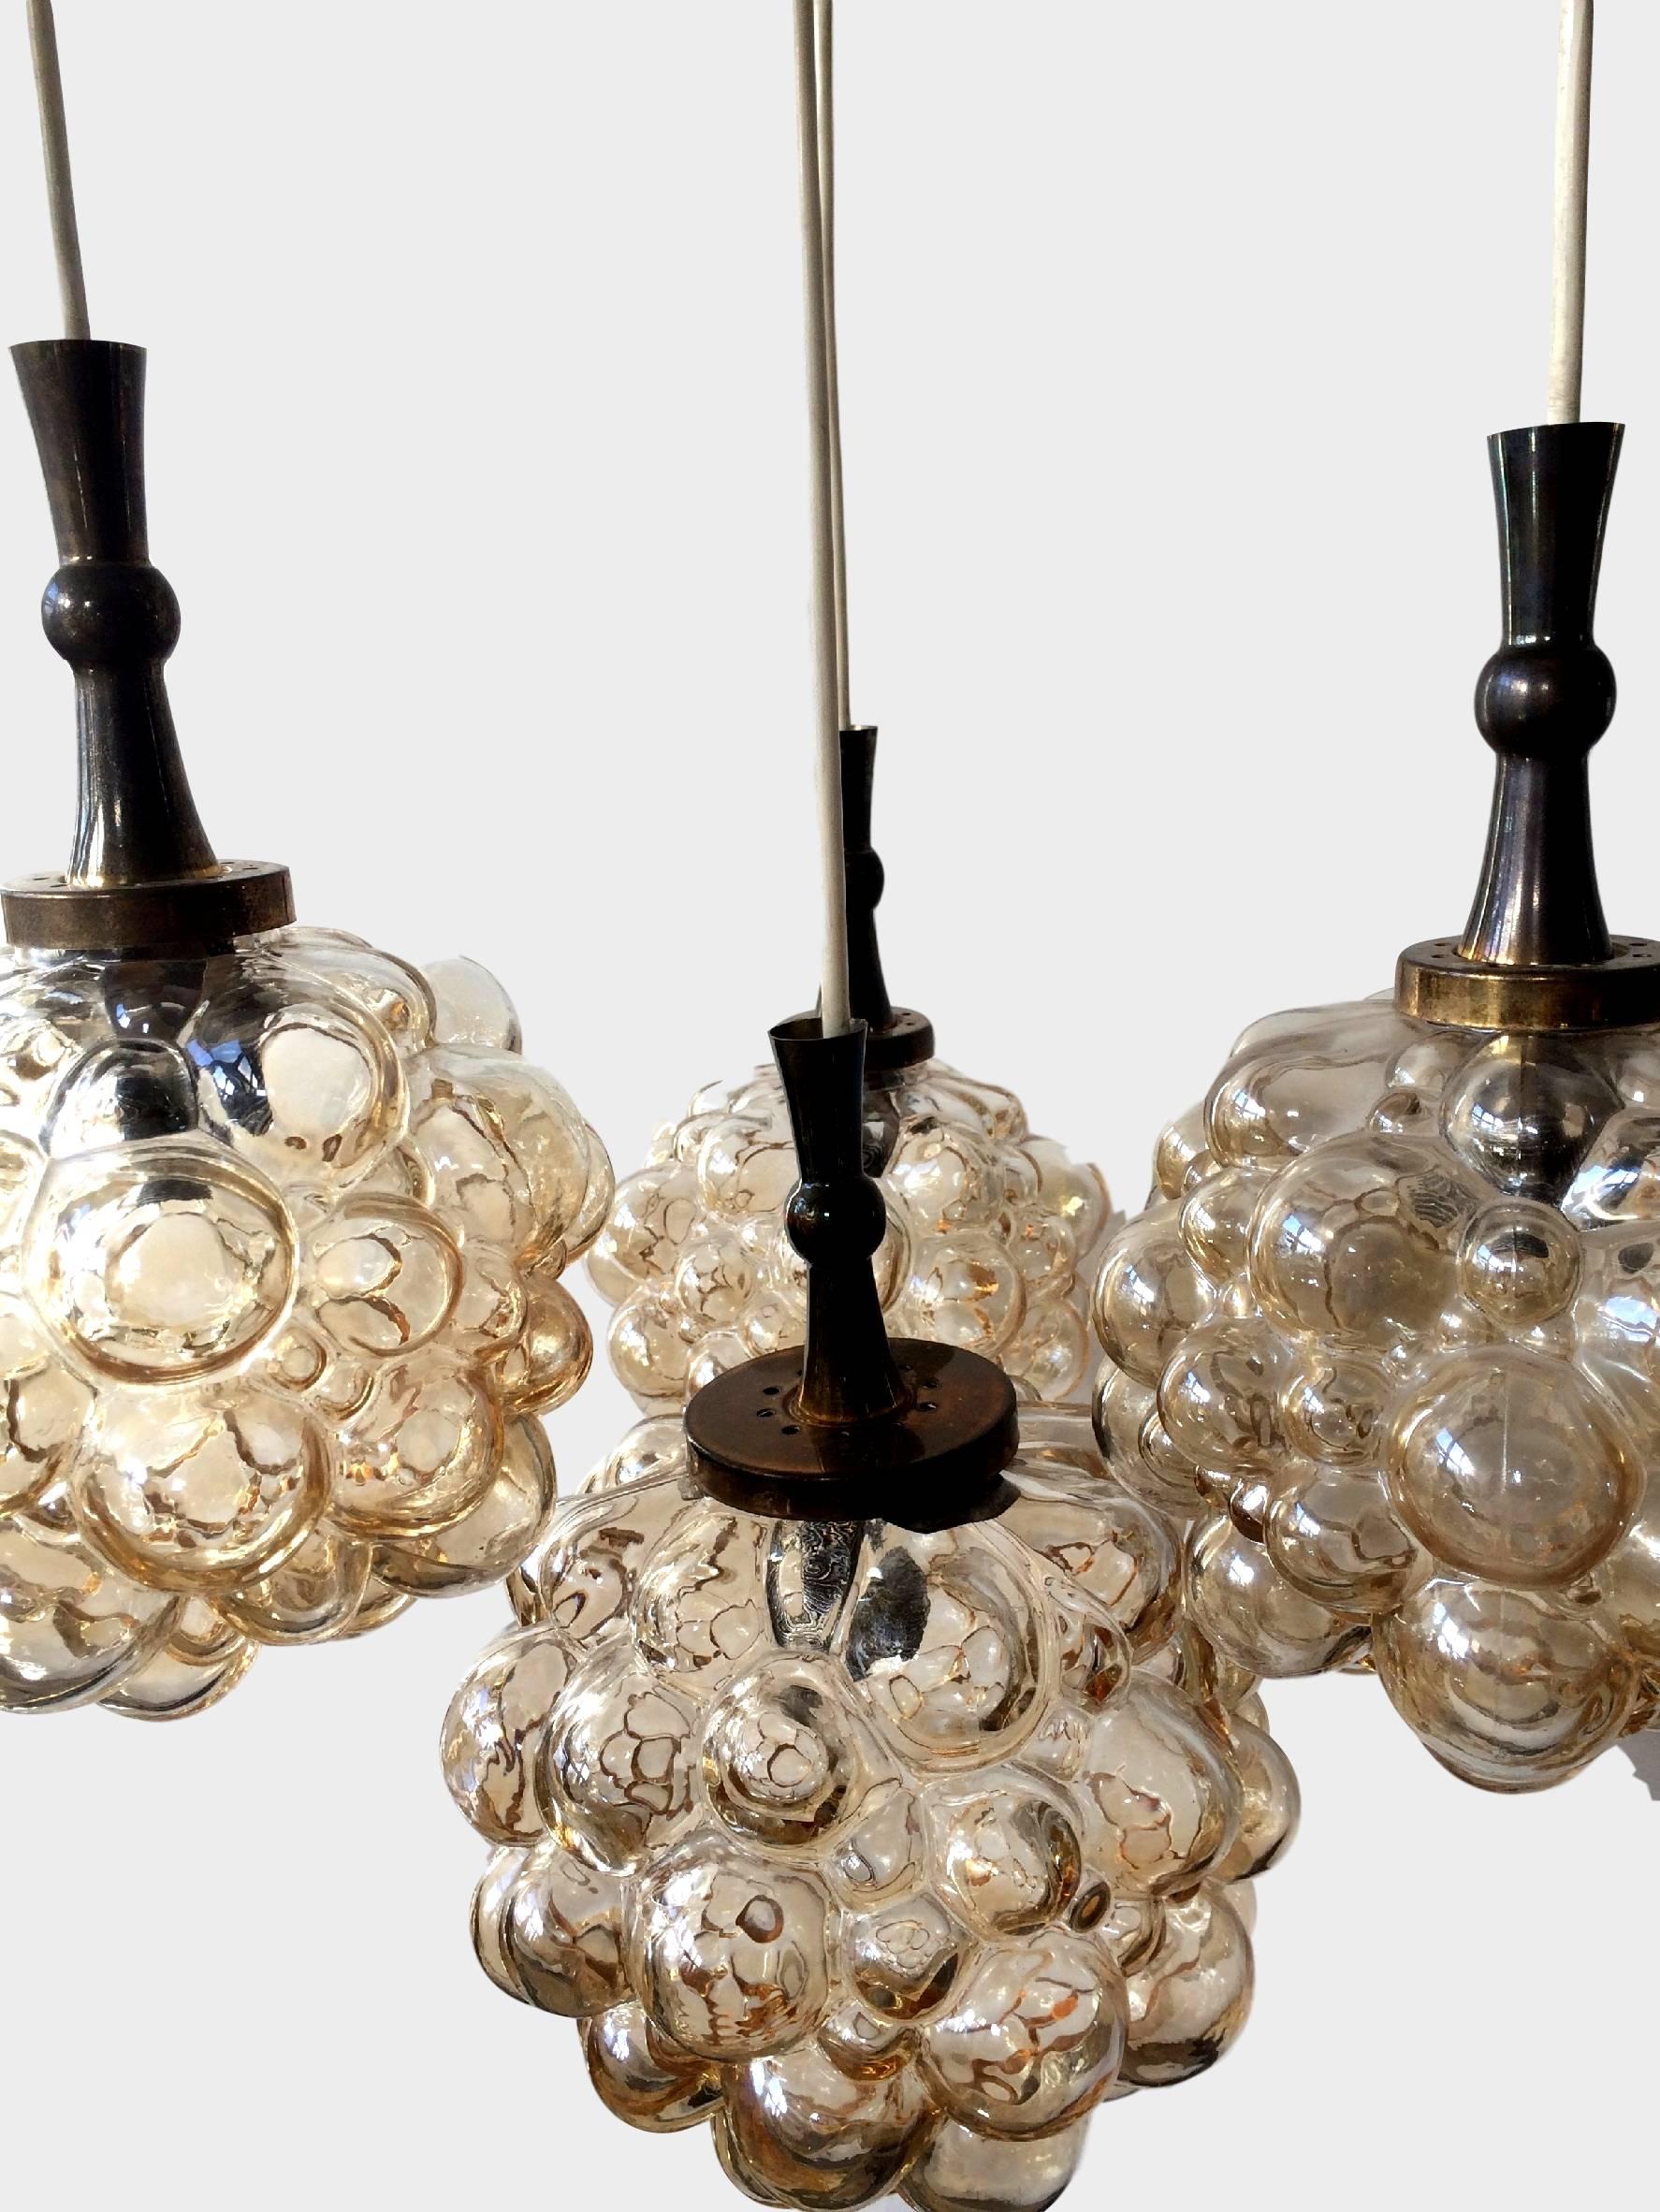 Impressive brass and amber toned glass bubble globe, four pendants chandelier

Thick amber colored bubbled glass globes in the style of Helena Tynell, by Limburg, Germany, circa 1960s.

Larger central pendant measures 20 cm tall, 22 cm wide,